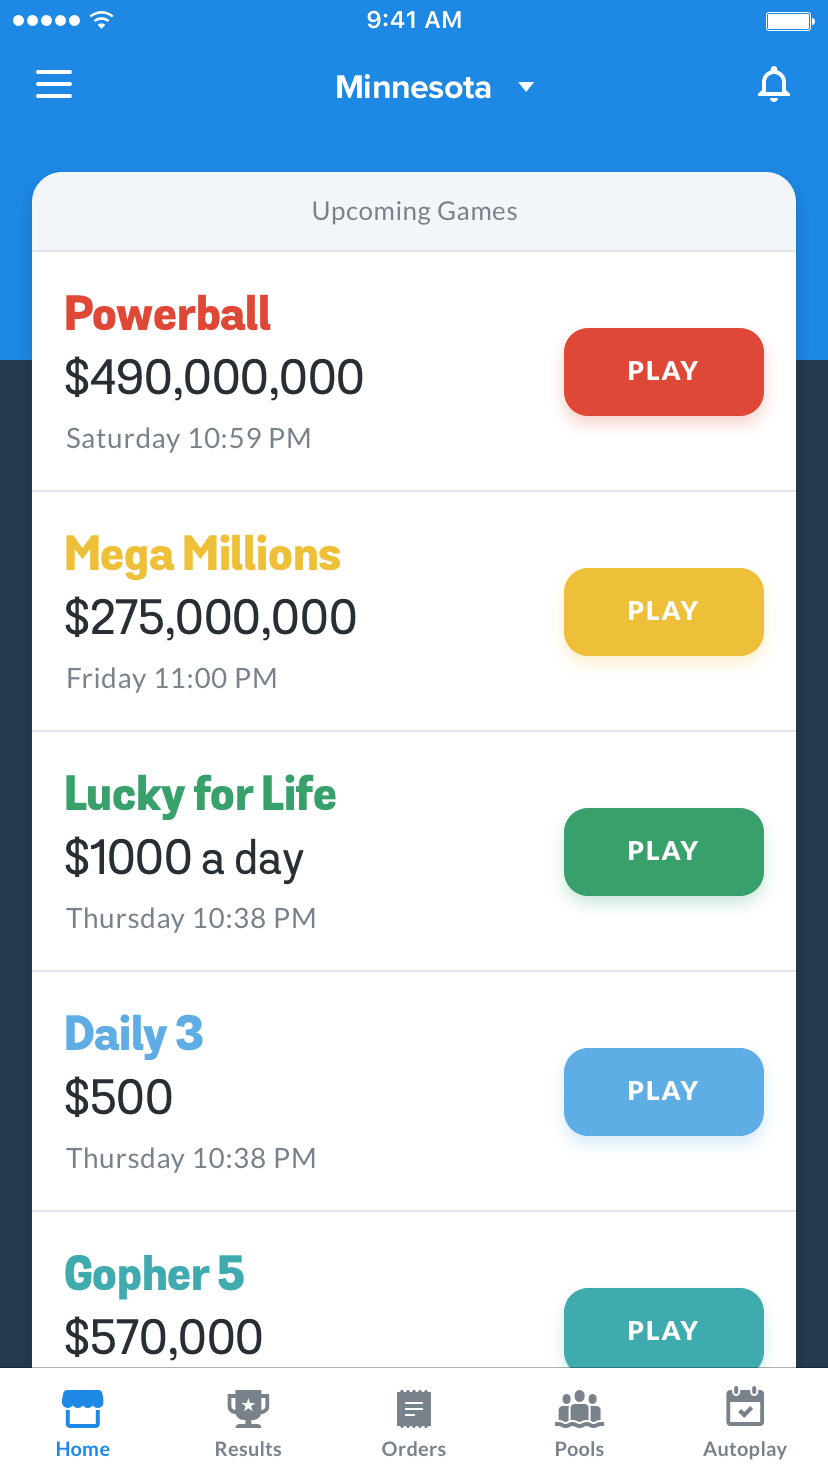 Lottery Games